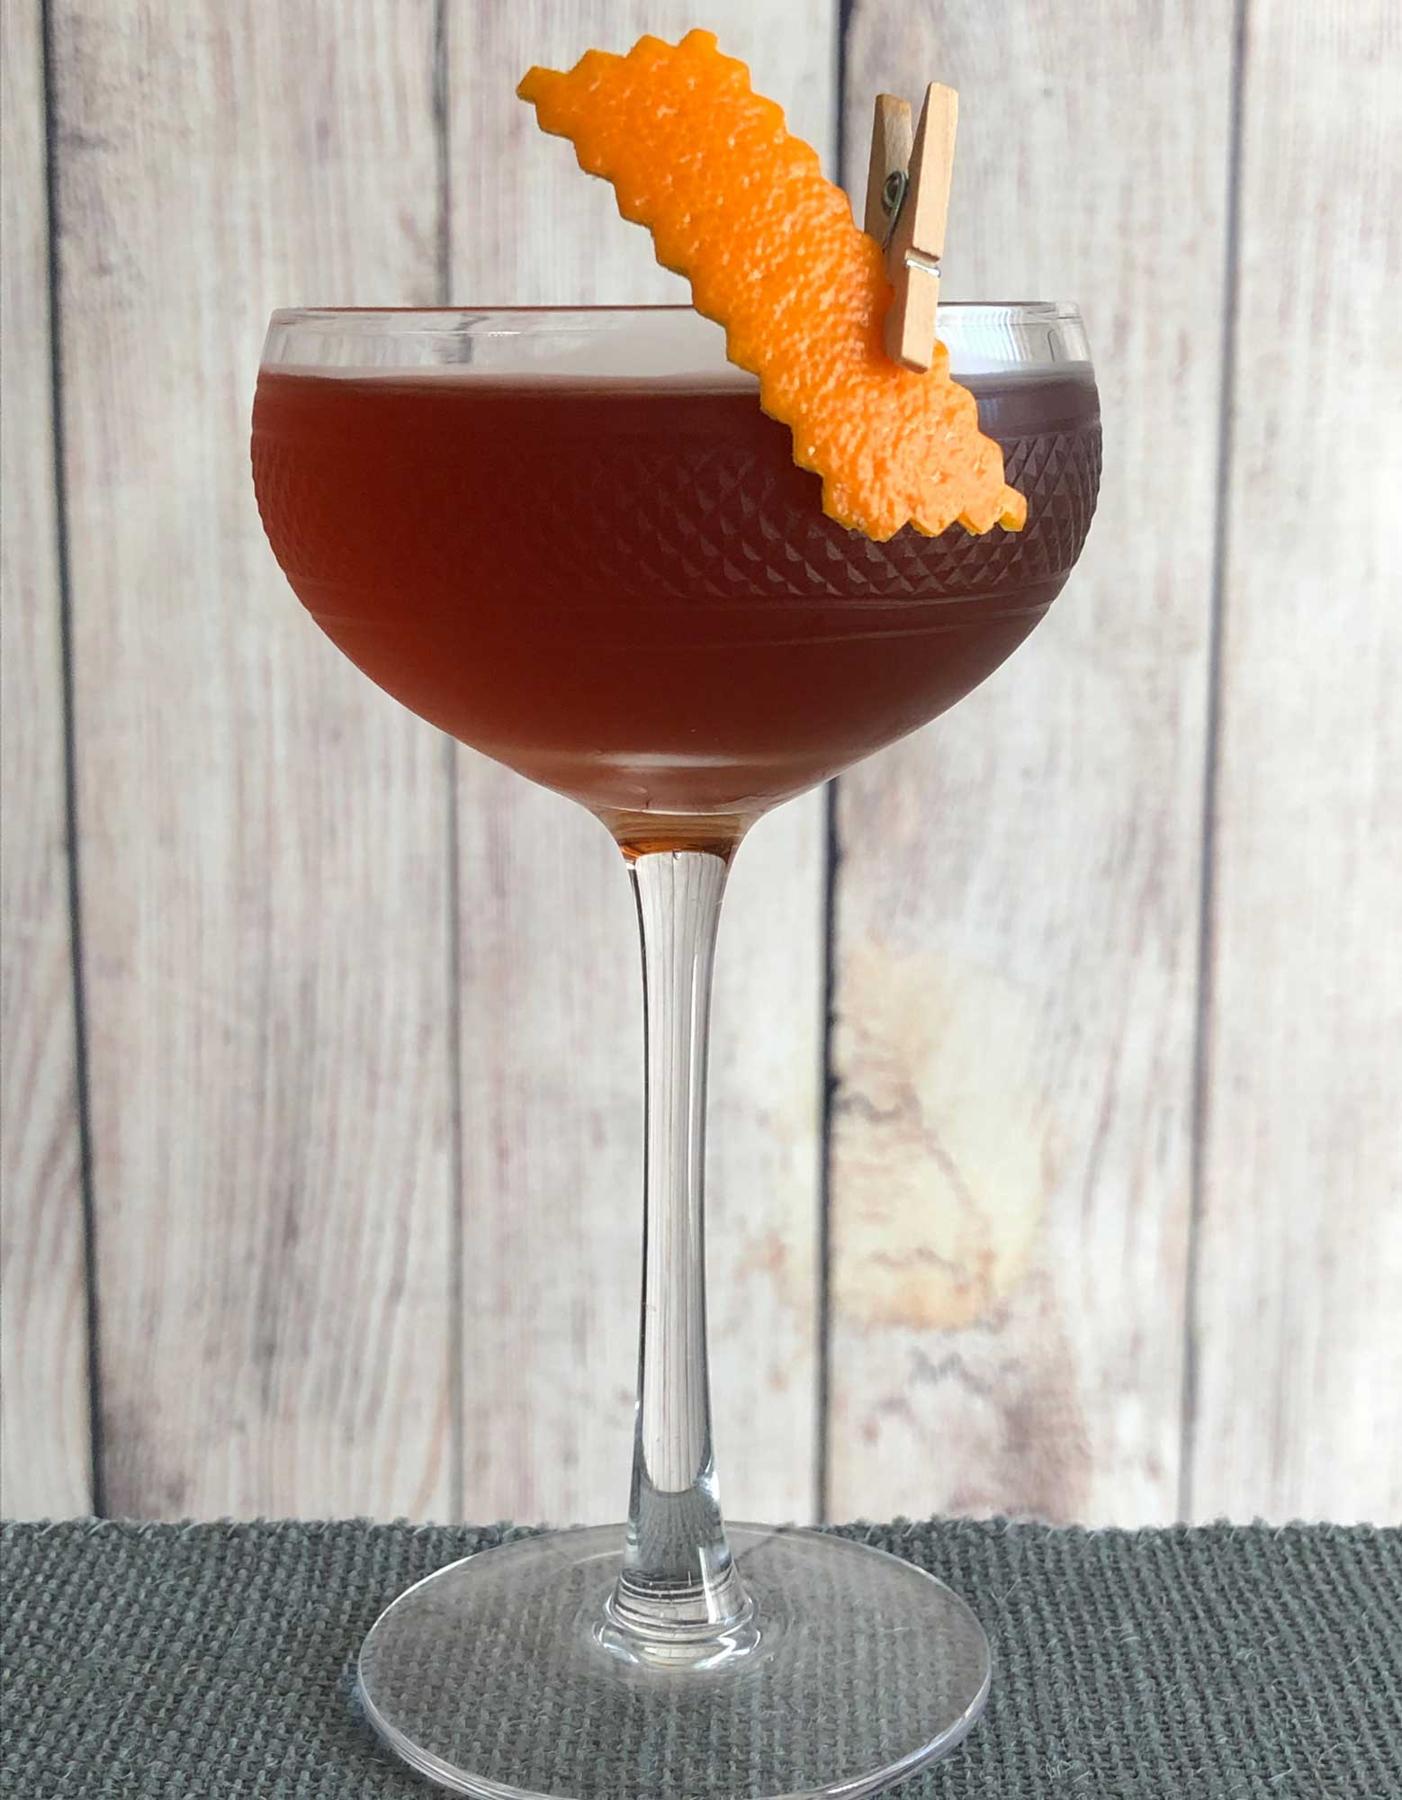 An example of the Palmetto No. 2, the mixed drink (drink) featuring The Scarlet Ibis Trinidad Rum, Dolin Rouge Vermouth de Chambéry, orange bitters, Angostura bitters, and orange twist; photo by Lee Edwards